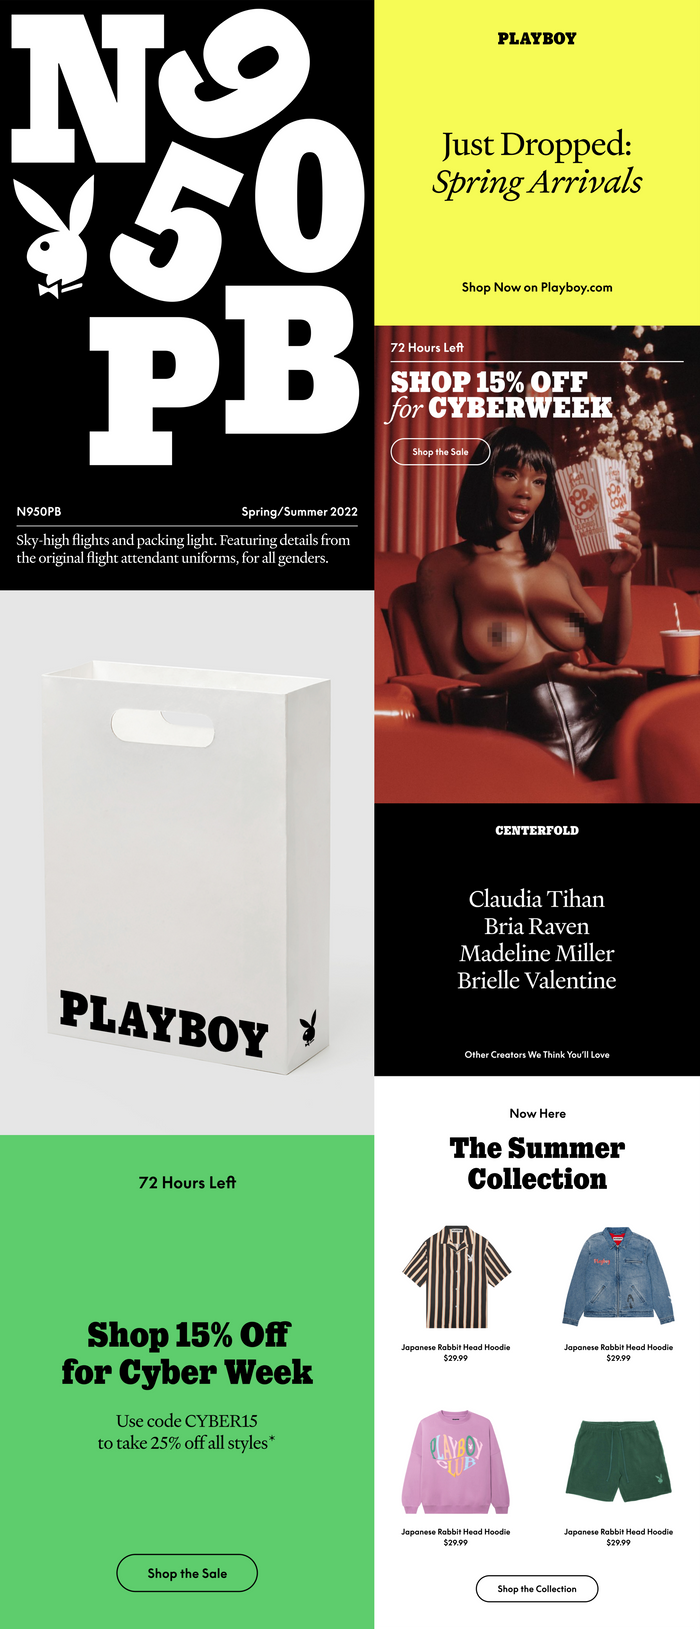 Playboy's Playful Bunny Embodies An Iconic Legacy And Cheeky Brand Identity